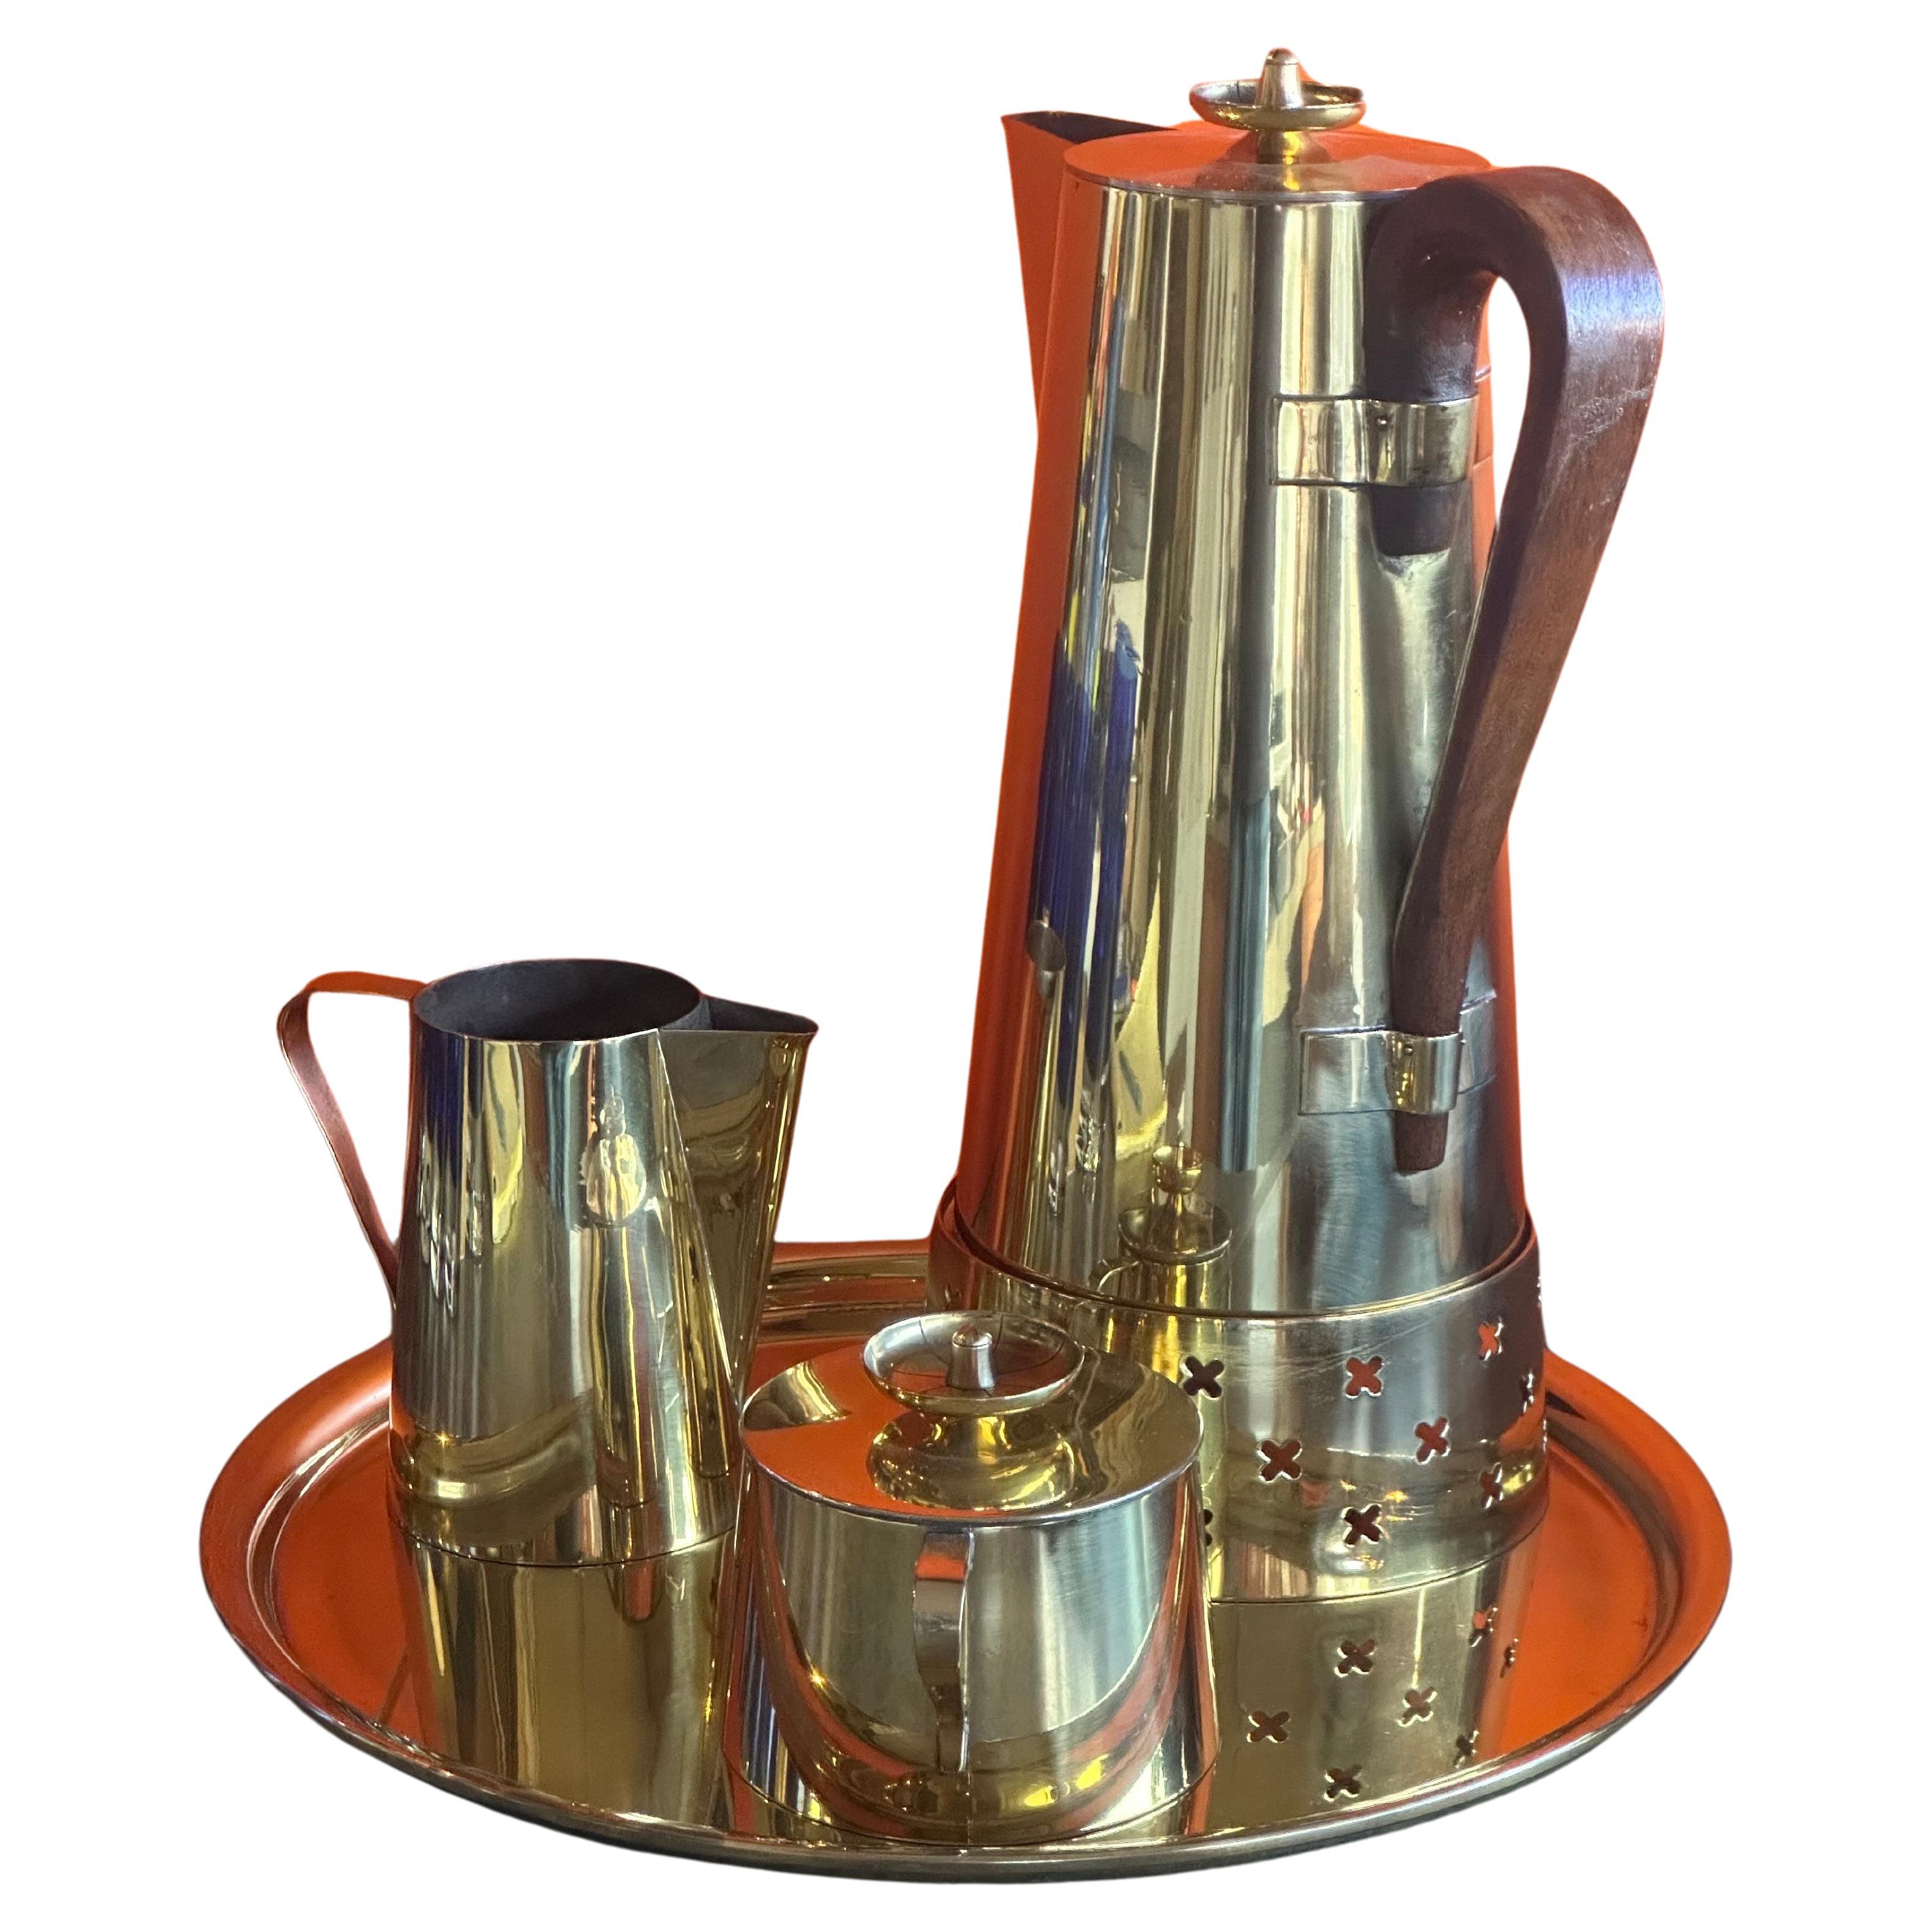 Stylish Hollyood Regency brass coffee set by Tommi Parzinger for Dorlyn Silver, circa 1970's. The set includes a coffee pot (including Sterno riser), creamer, lidded sugar bowl and serving tray.  The coffee pot is 6